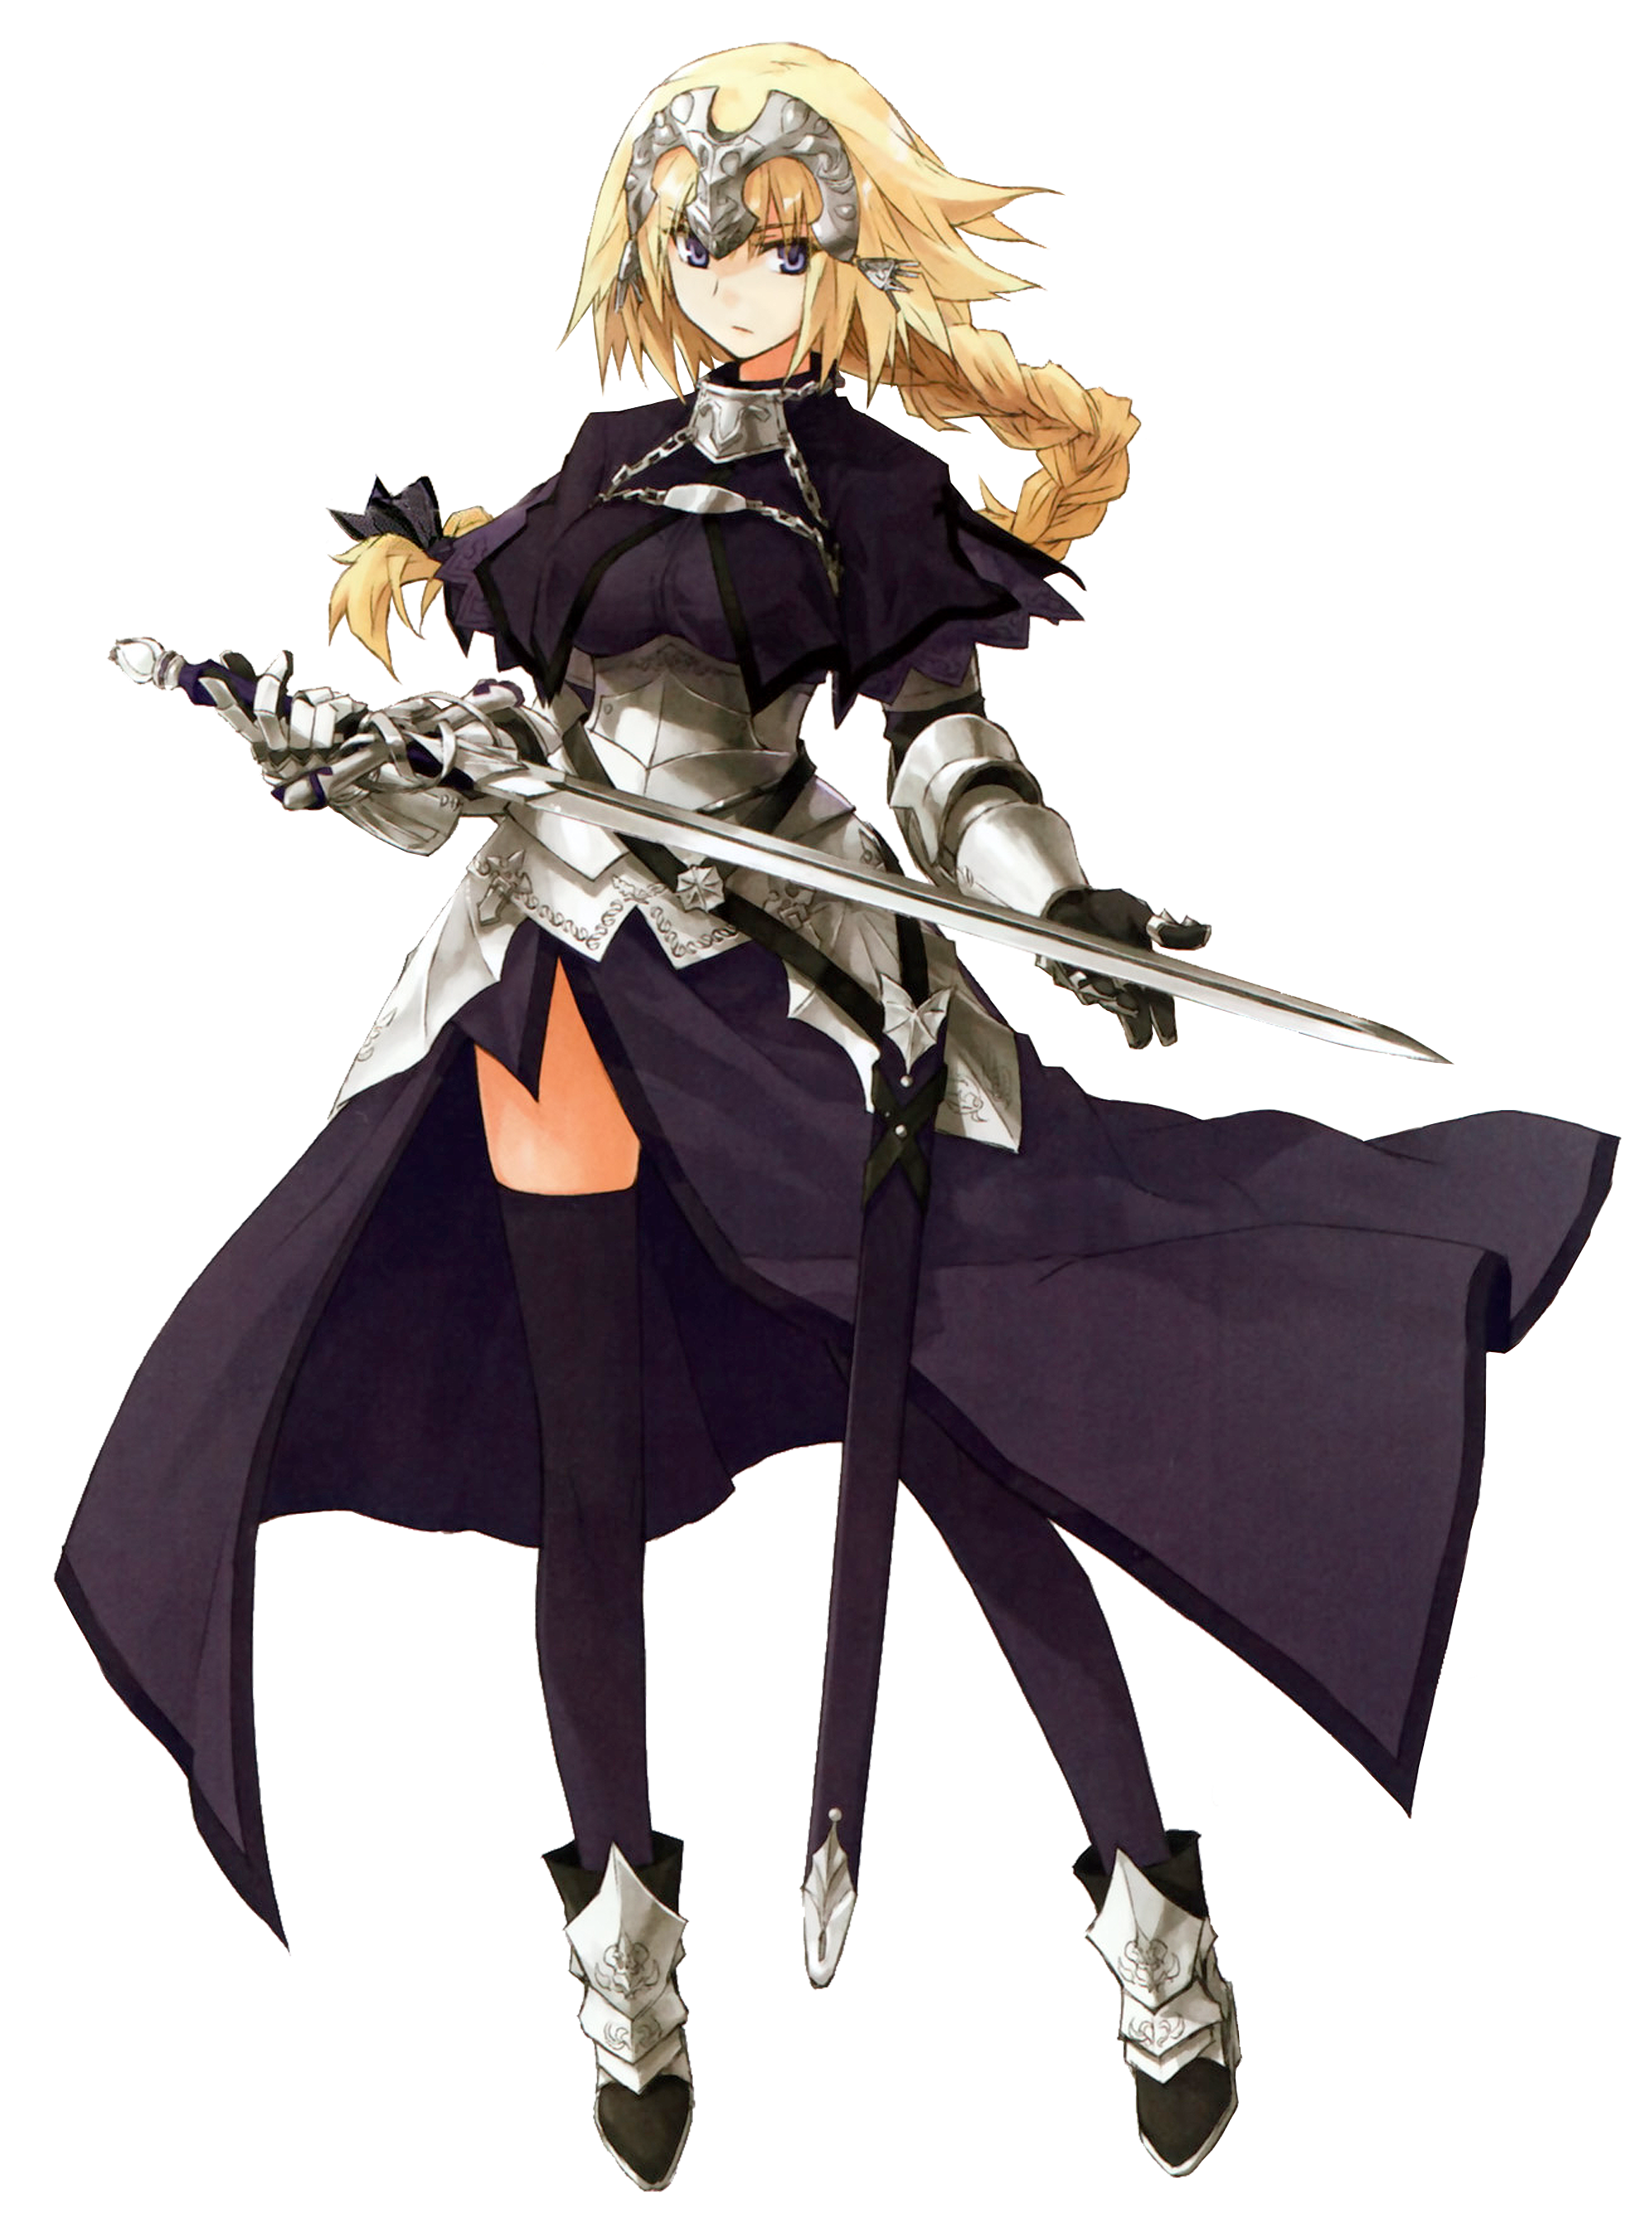 Fate Apocrypha Wallpapers Anime Hq Fate Apocrypha Pictures 4k Wallpapers 19